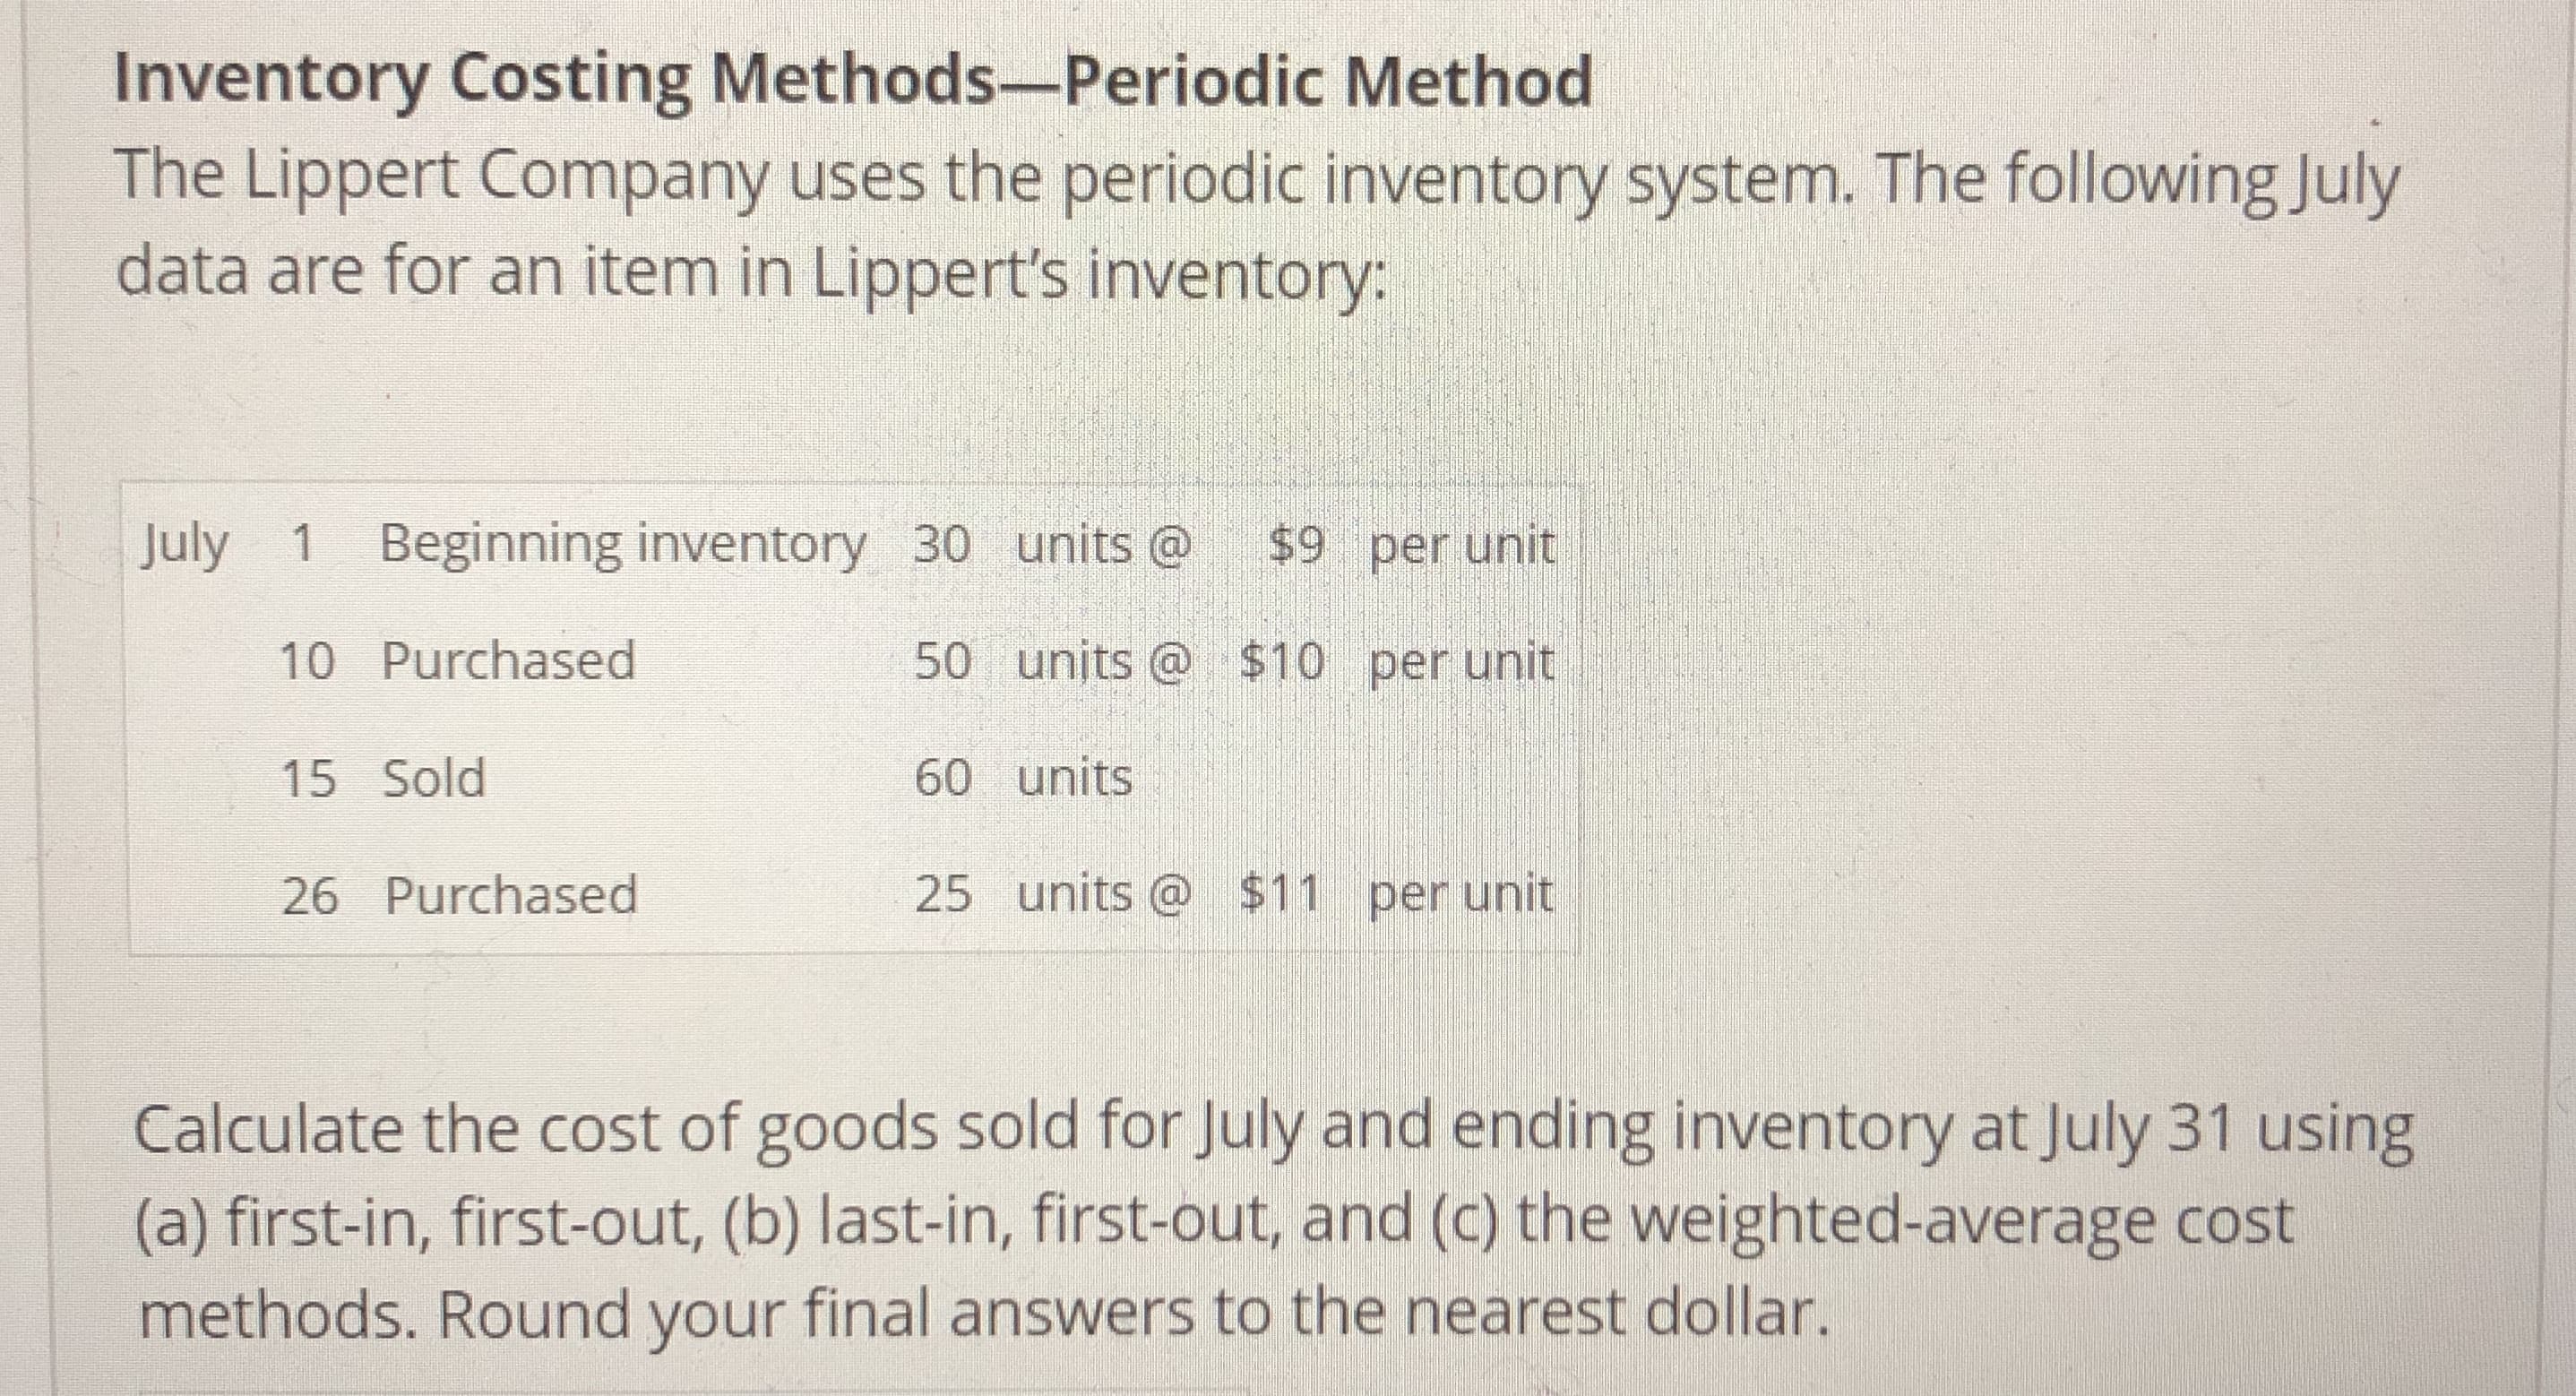 Inventory Costing Methods-Periodic Method
The Lippert Company uses the periodic inventory system. The following July
data are for an item in Lippert's inventory:
July 1 Beginning inventory 30 units o $9 per unit
10 Purchased
15 Sold
26 Purchased
50 units $10 per unit
60 units
25 units @ $11 per unit
Calculate the cost of goods sold for July and ending inventory at July 31 using
(a) first-in, first-out, (b) last-in, first-out, and (c) the weighted-average cost
methods. Round your final answers to the nearest dollar.
